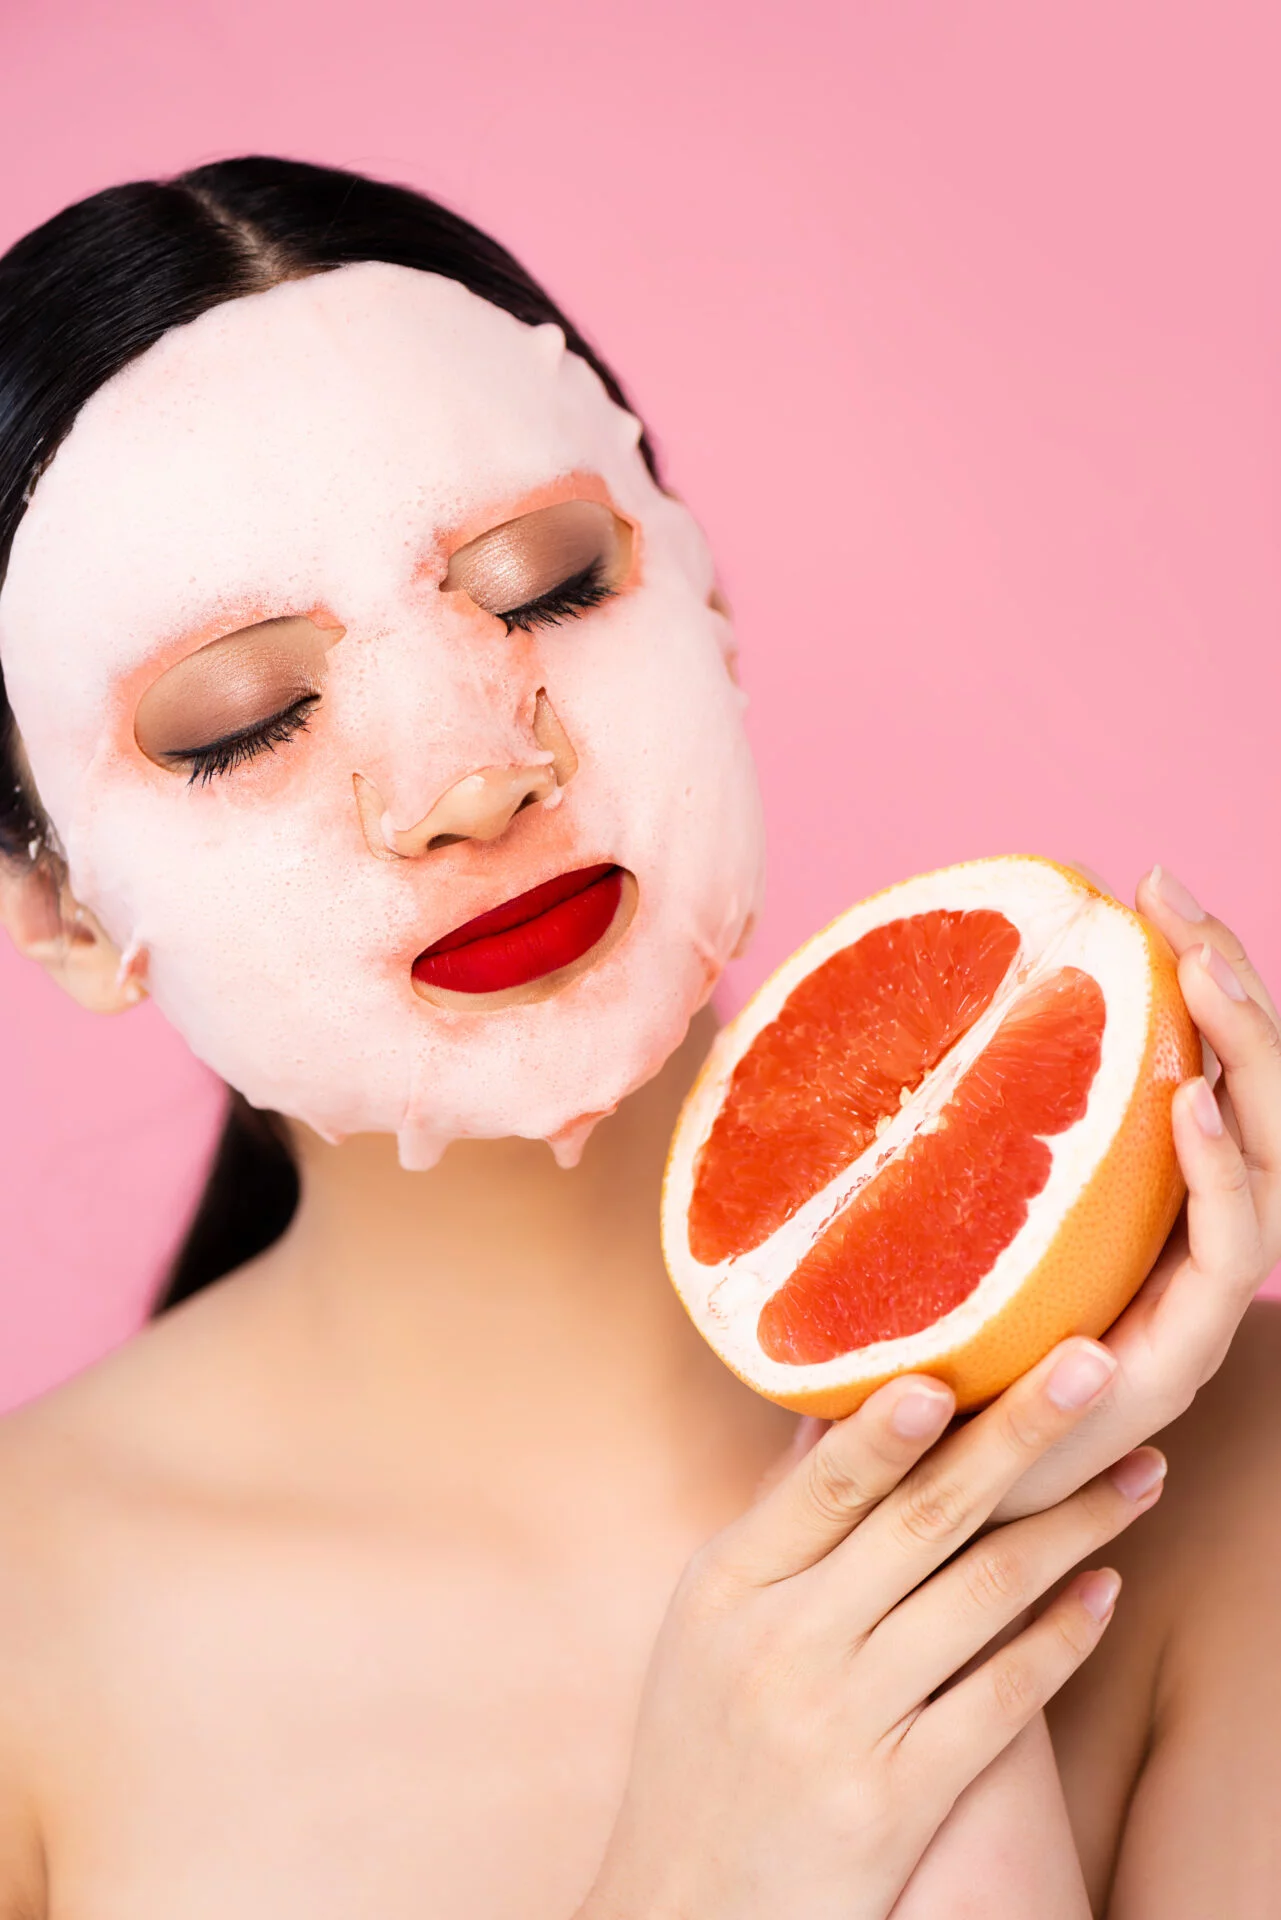 Korean woman with a non-toxic k-beauty face mask holding a grapefruit